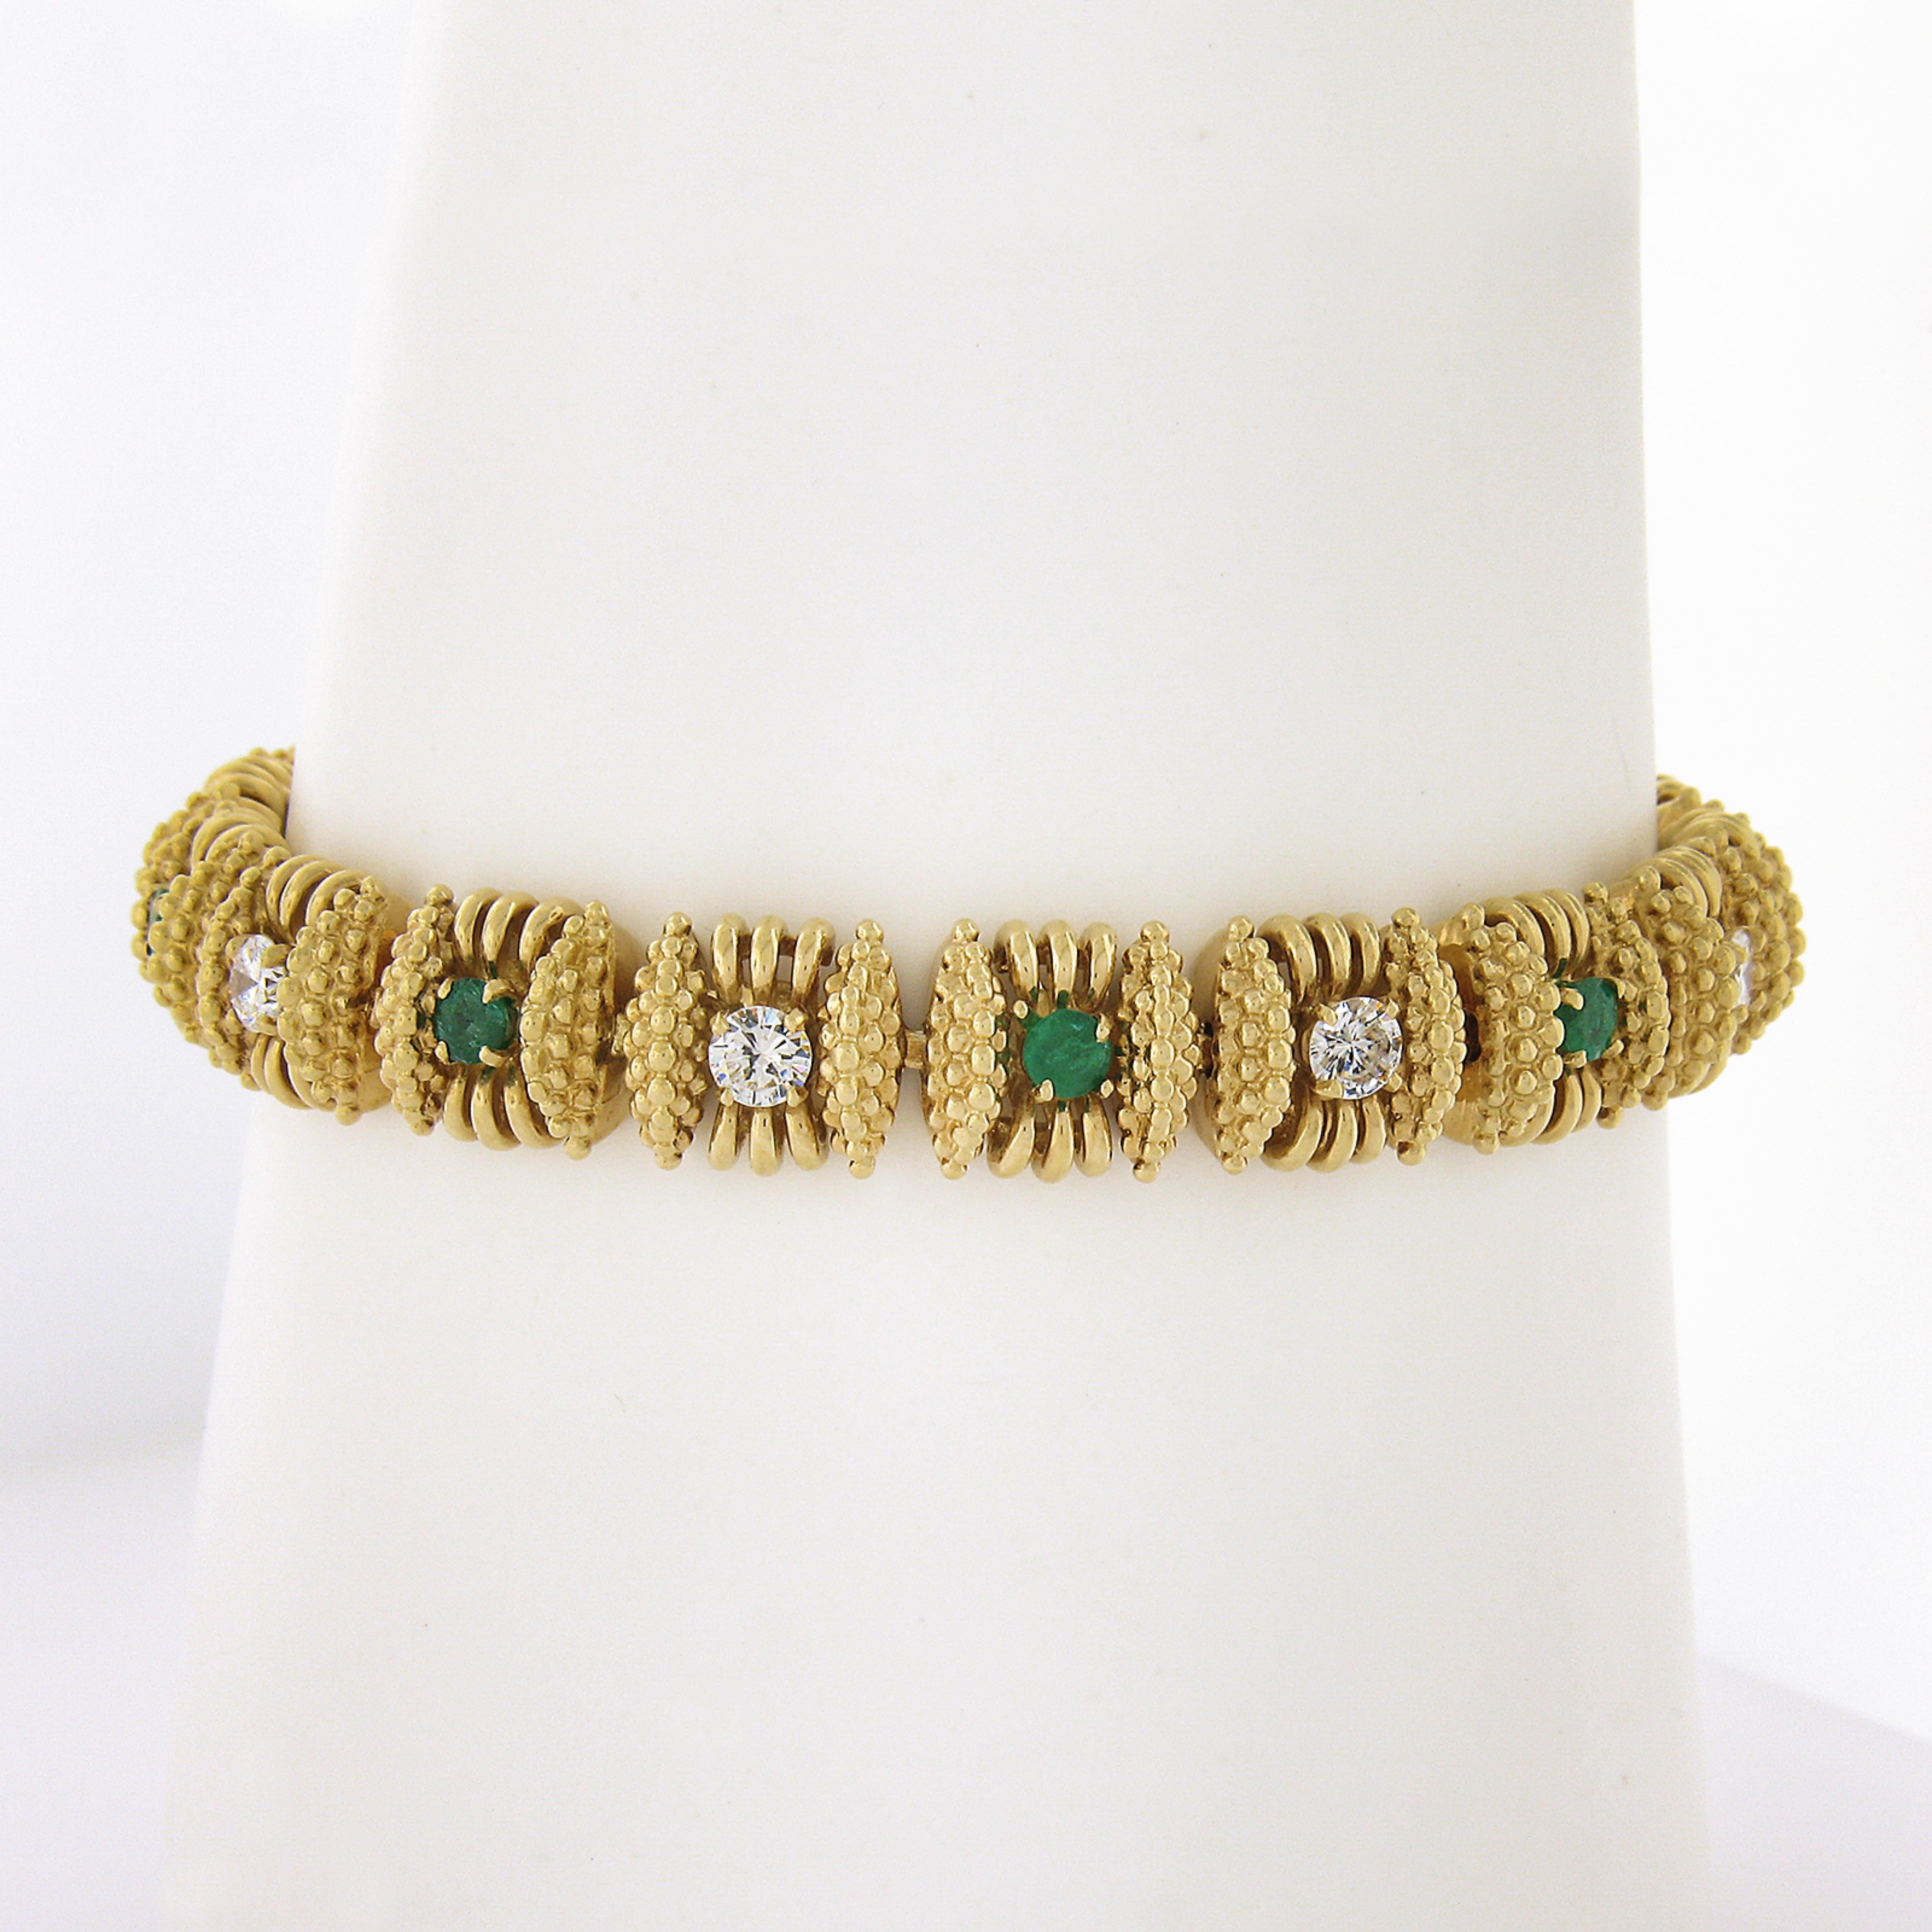 This magnificent vintage statement line bracelet is very well crafted from solid 18k yellow gold. It features top quality emeralds and large diamonds neatly prong set throughout. This is an outstanding and very well made bracelet that is absolutely